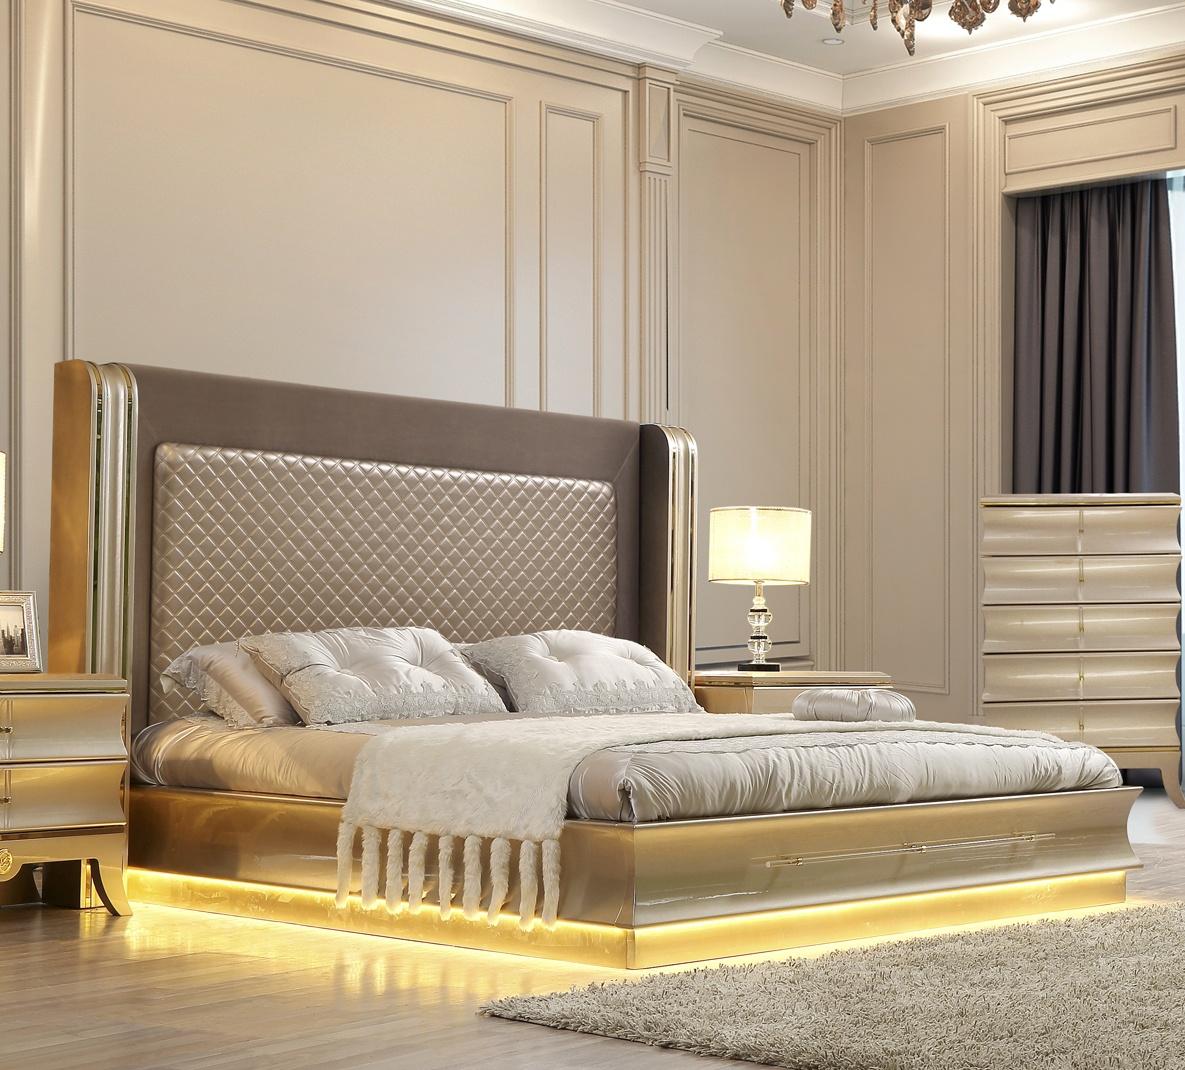 

    
Glam Belle Silver & Gold CAL King Bedroom Set 3Pcs Contemporary Homey Design HD-925
